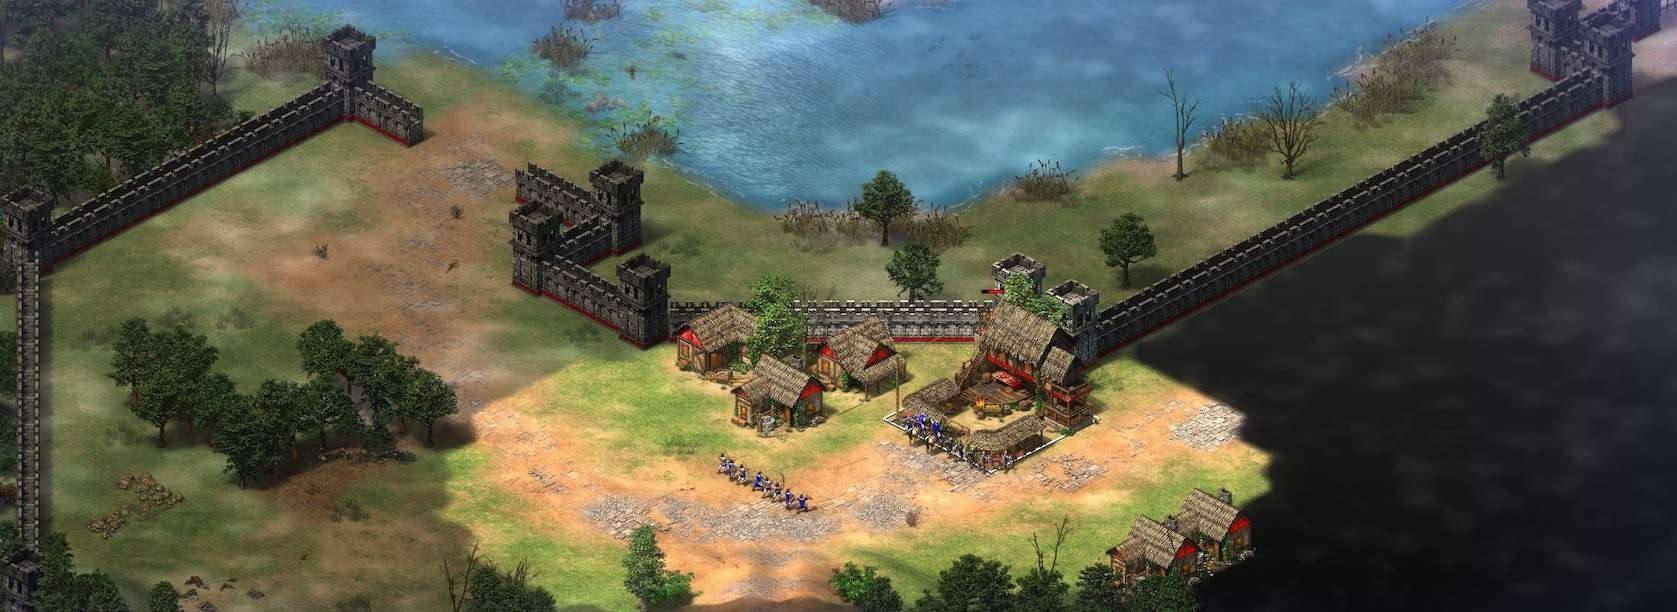 age of empires 2 strategy